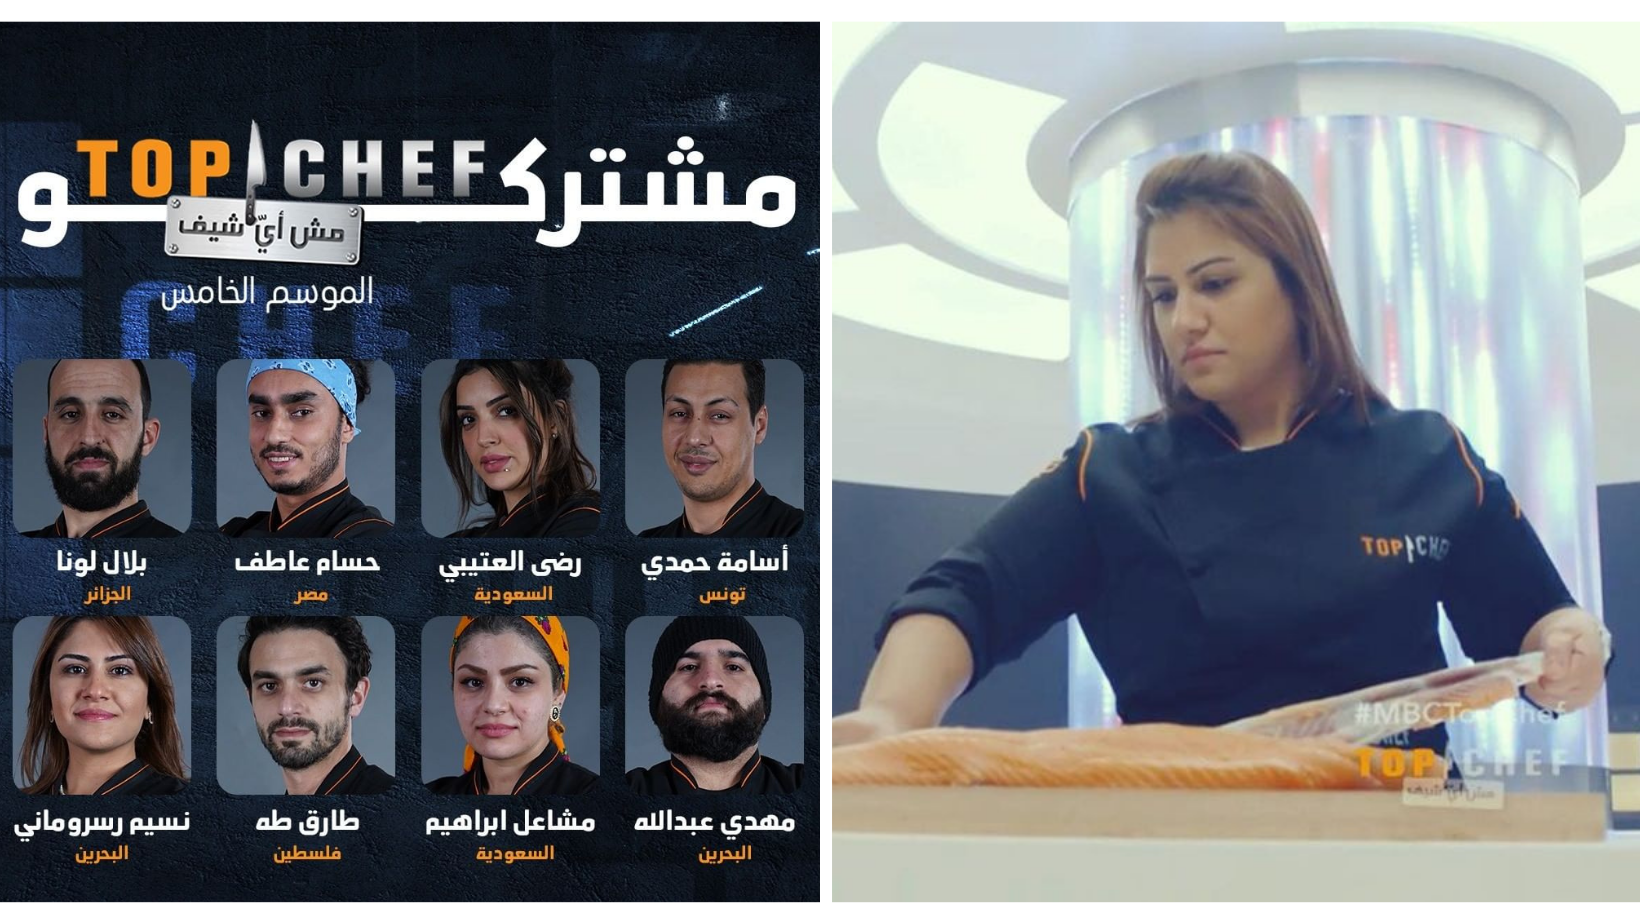 These Bahraini Chefs Are Competing in MBC’s Top Chef and We’re So Proud